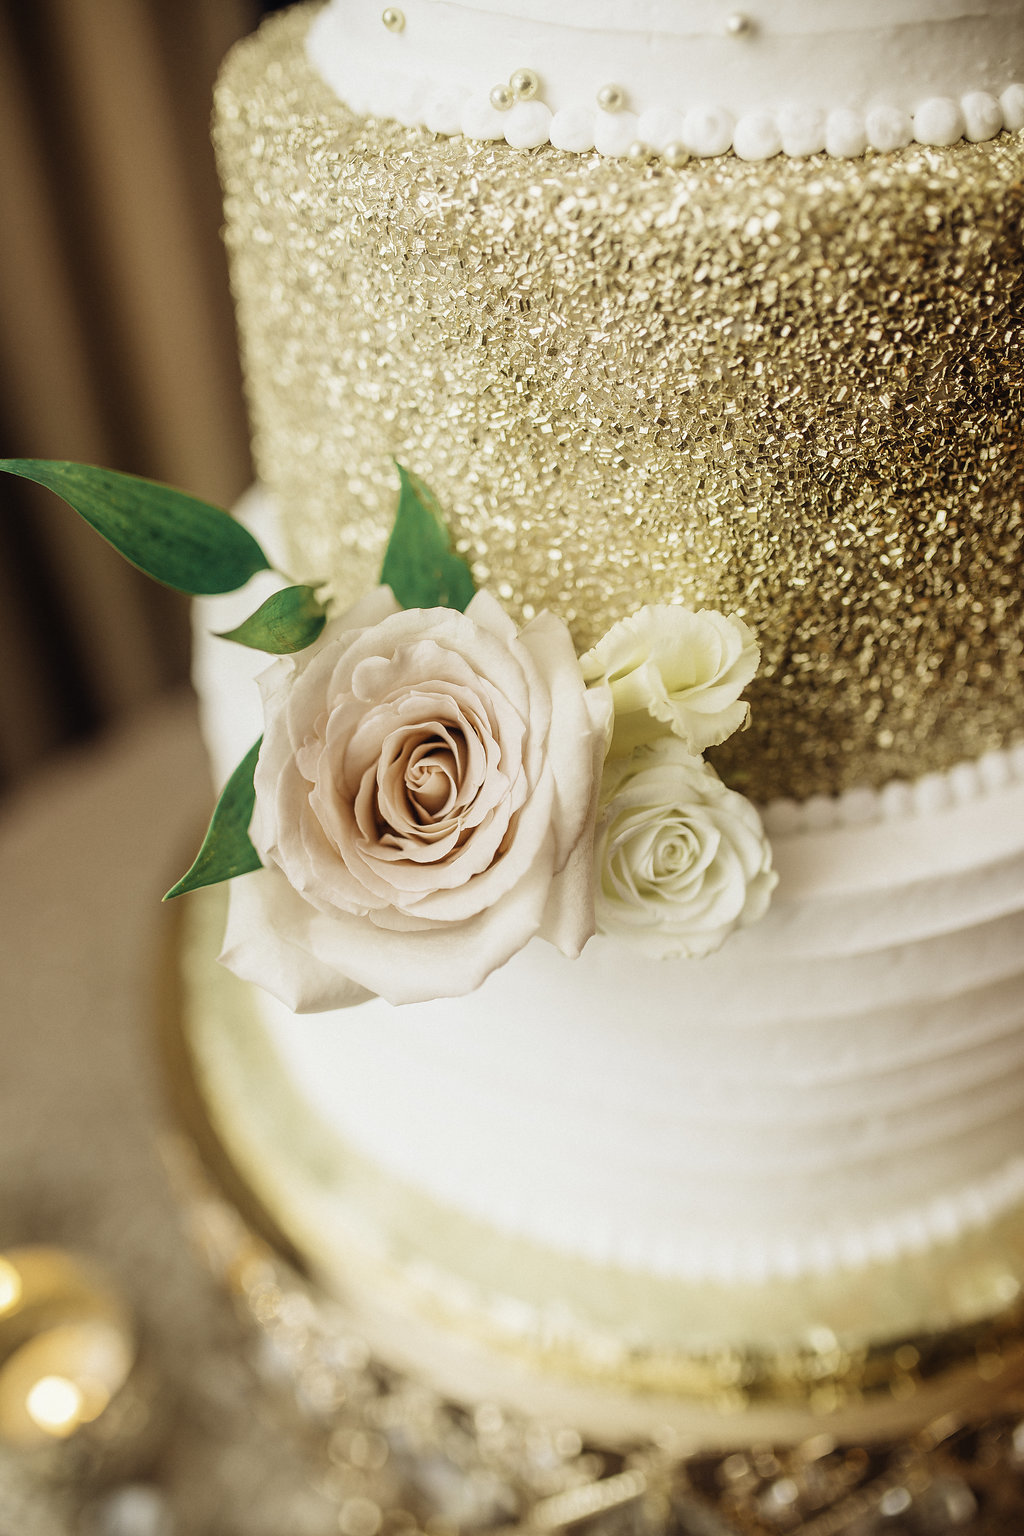 Wedding Photograph Of Cake Decorated With a Rose Los Angeles